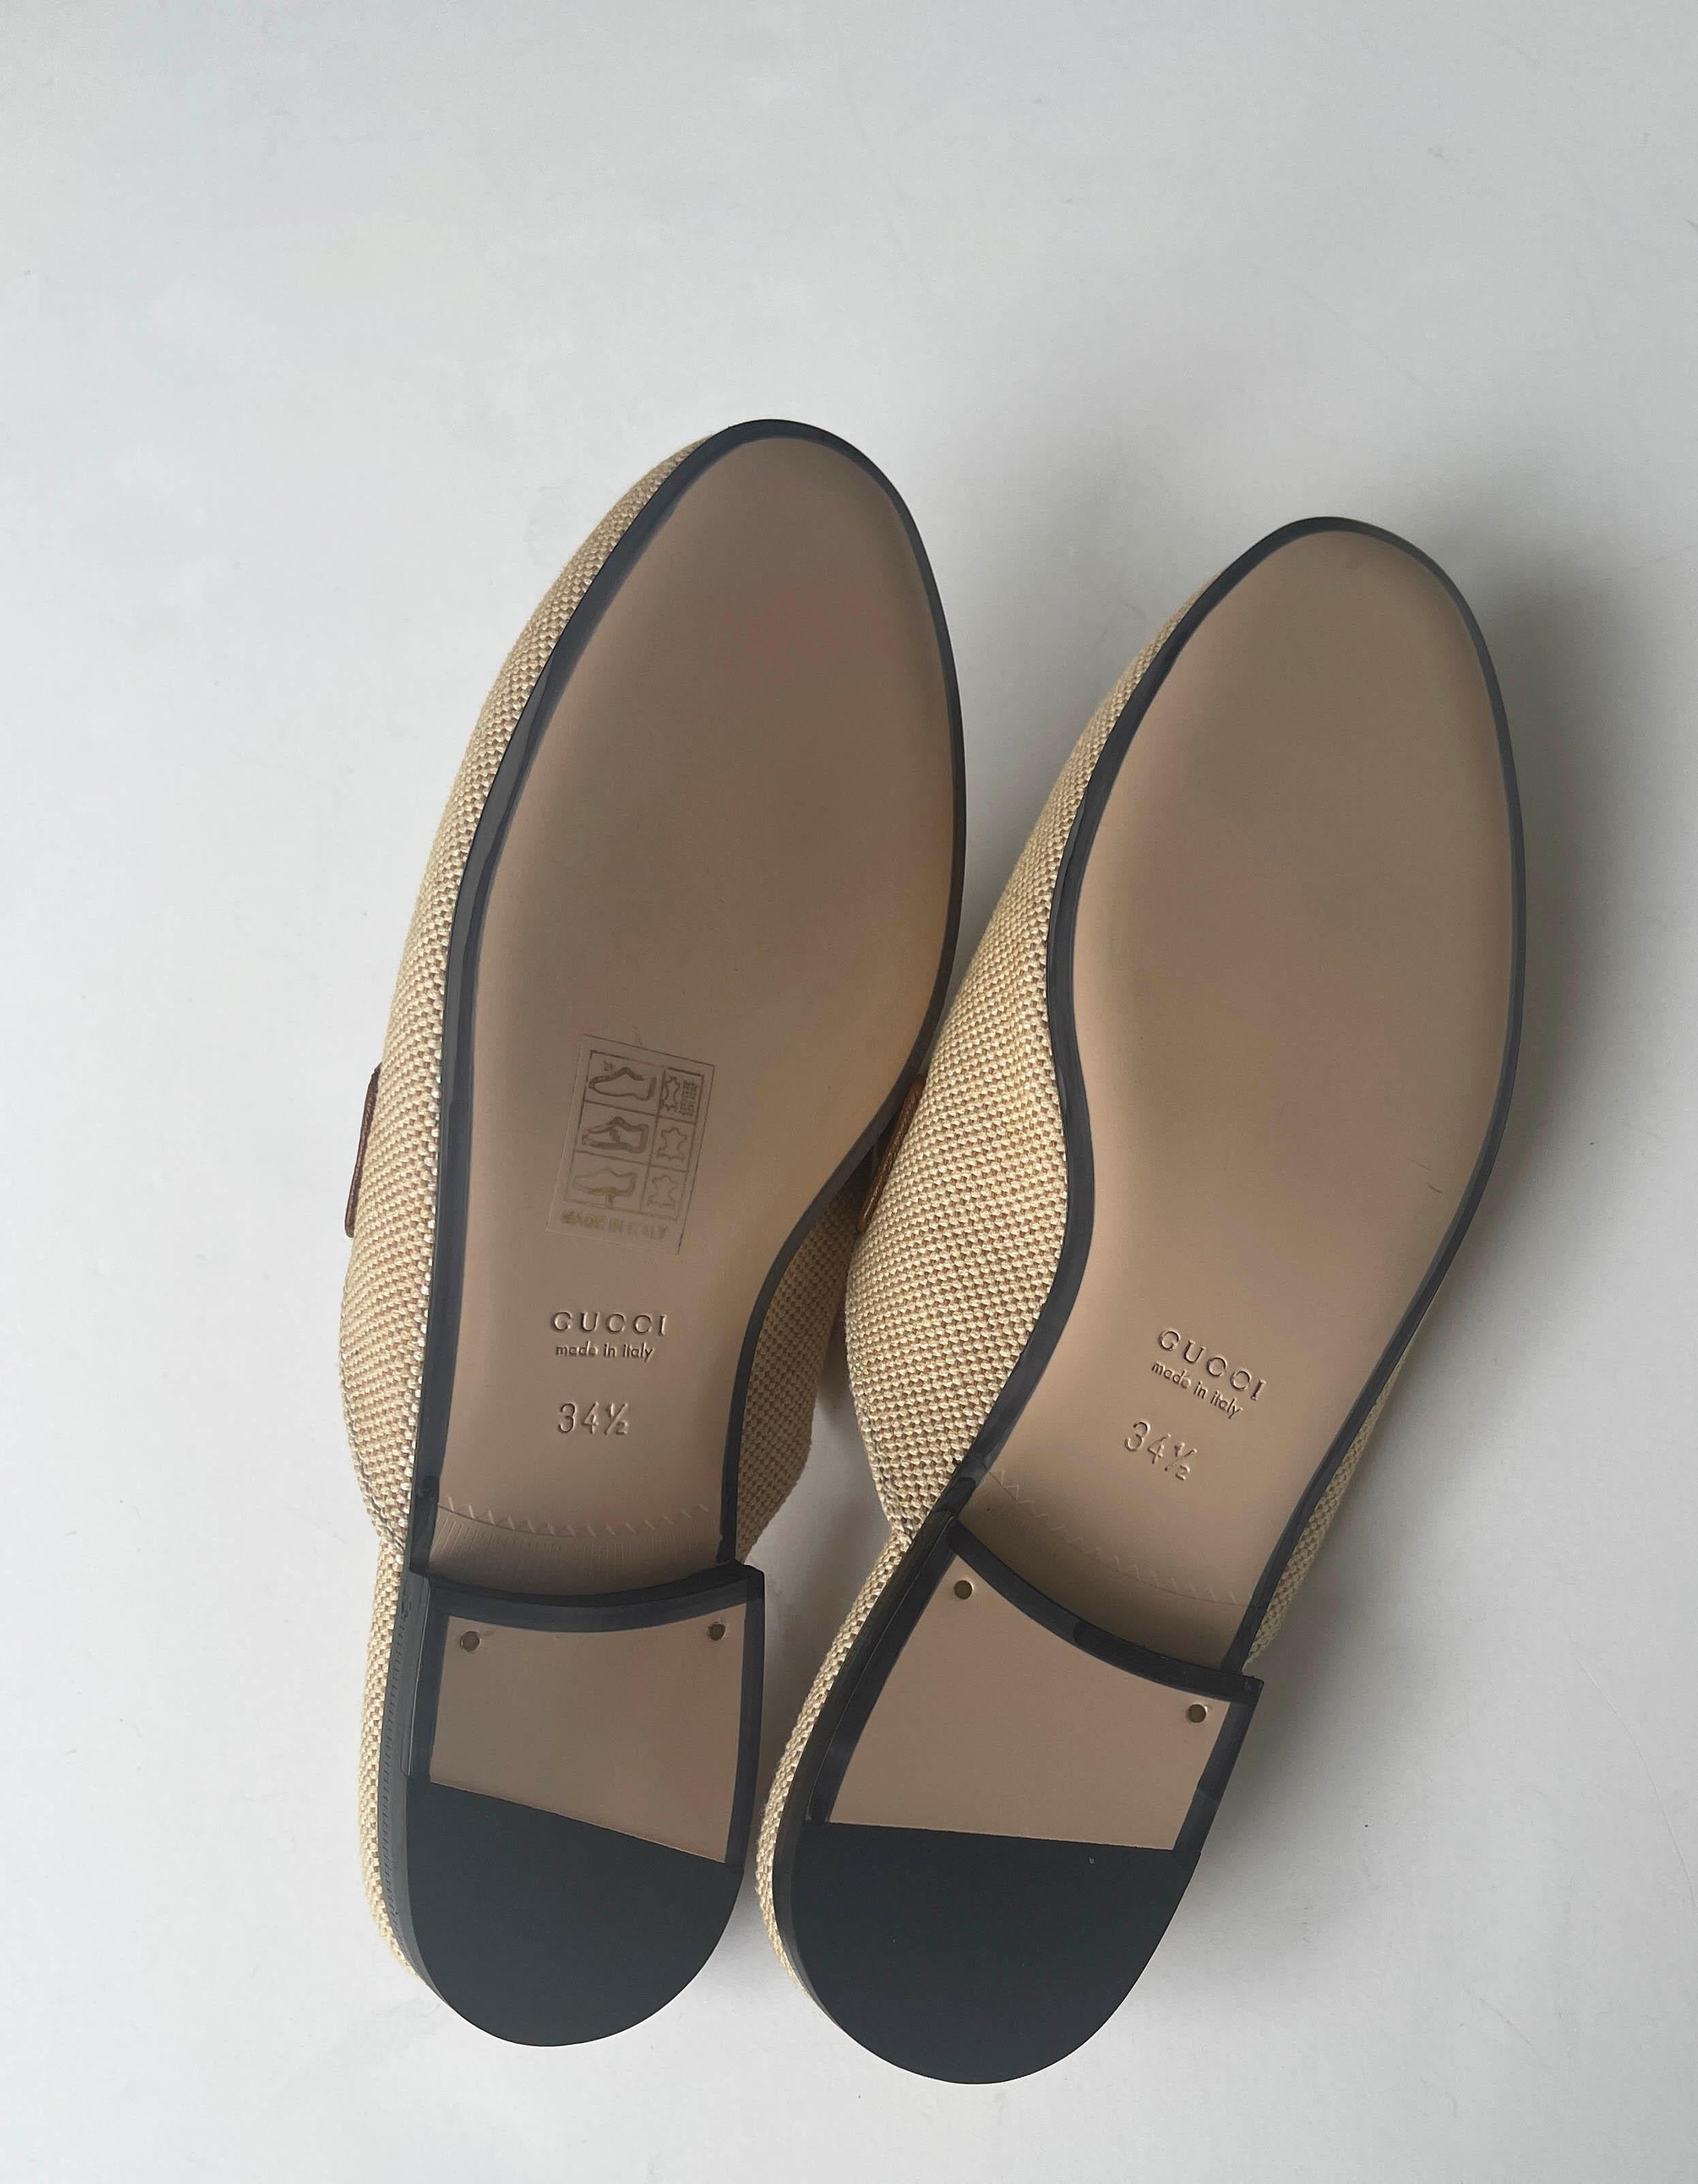 Gucci 2019 NEW Beige Princetown Flat Canvas Bit Mules sz 34.5. Features red and green web and leather trim

Made In: Italy
Year of Production: 2019
Color: Beige with red and green
Hardware: Goldtone
Materials: Canvas, leather, metal
Closure/Opening: